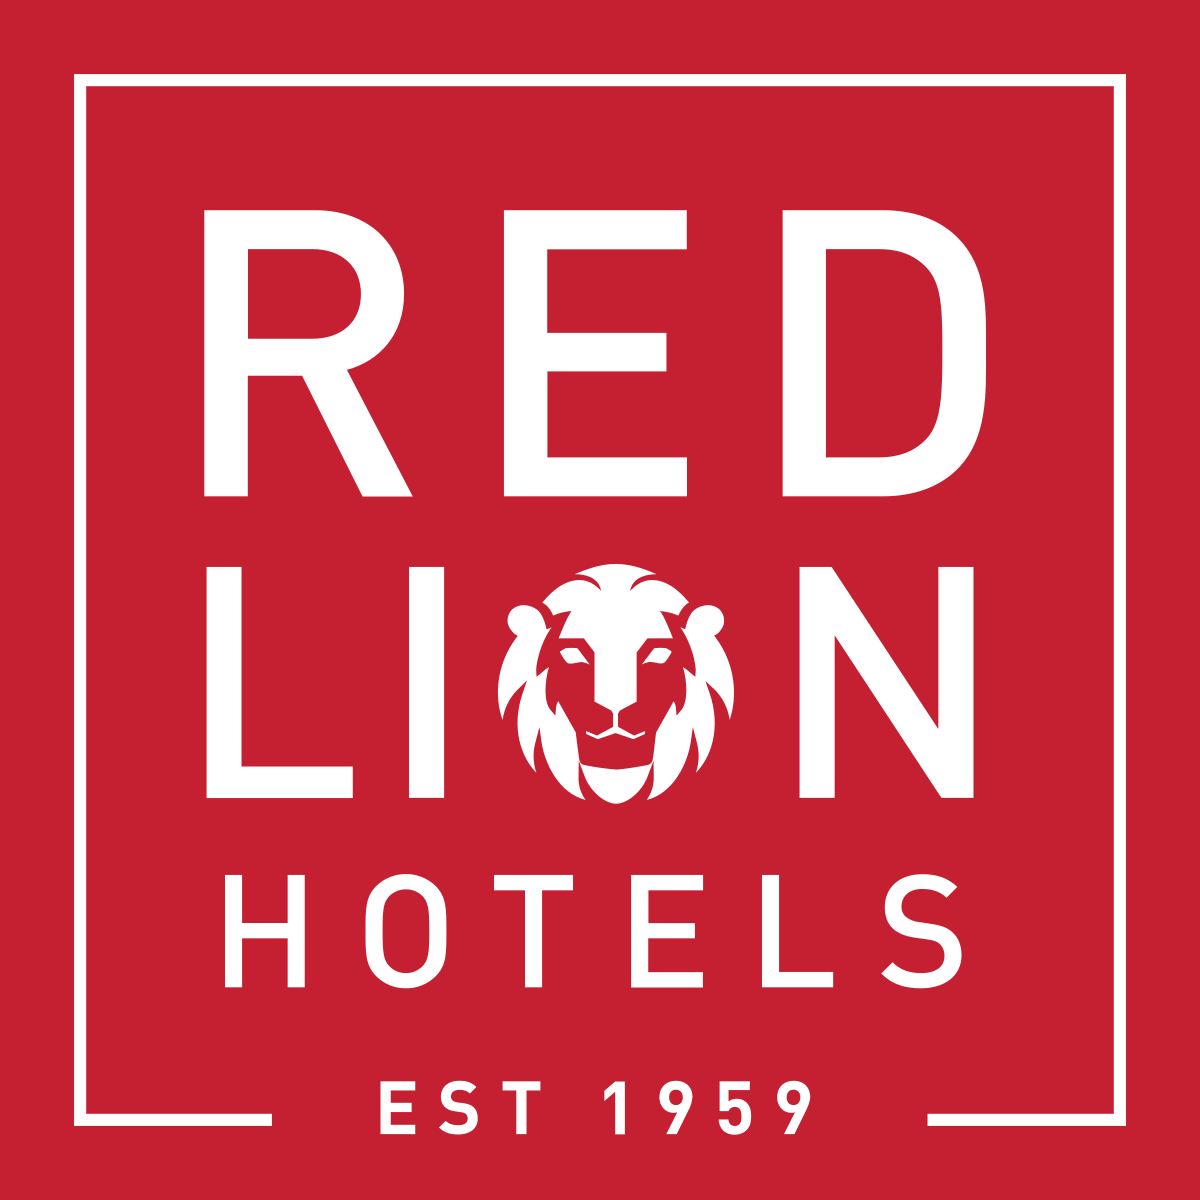 Red square logo reading Red lion Hotels est 1959 will illustration of a lion's head